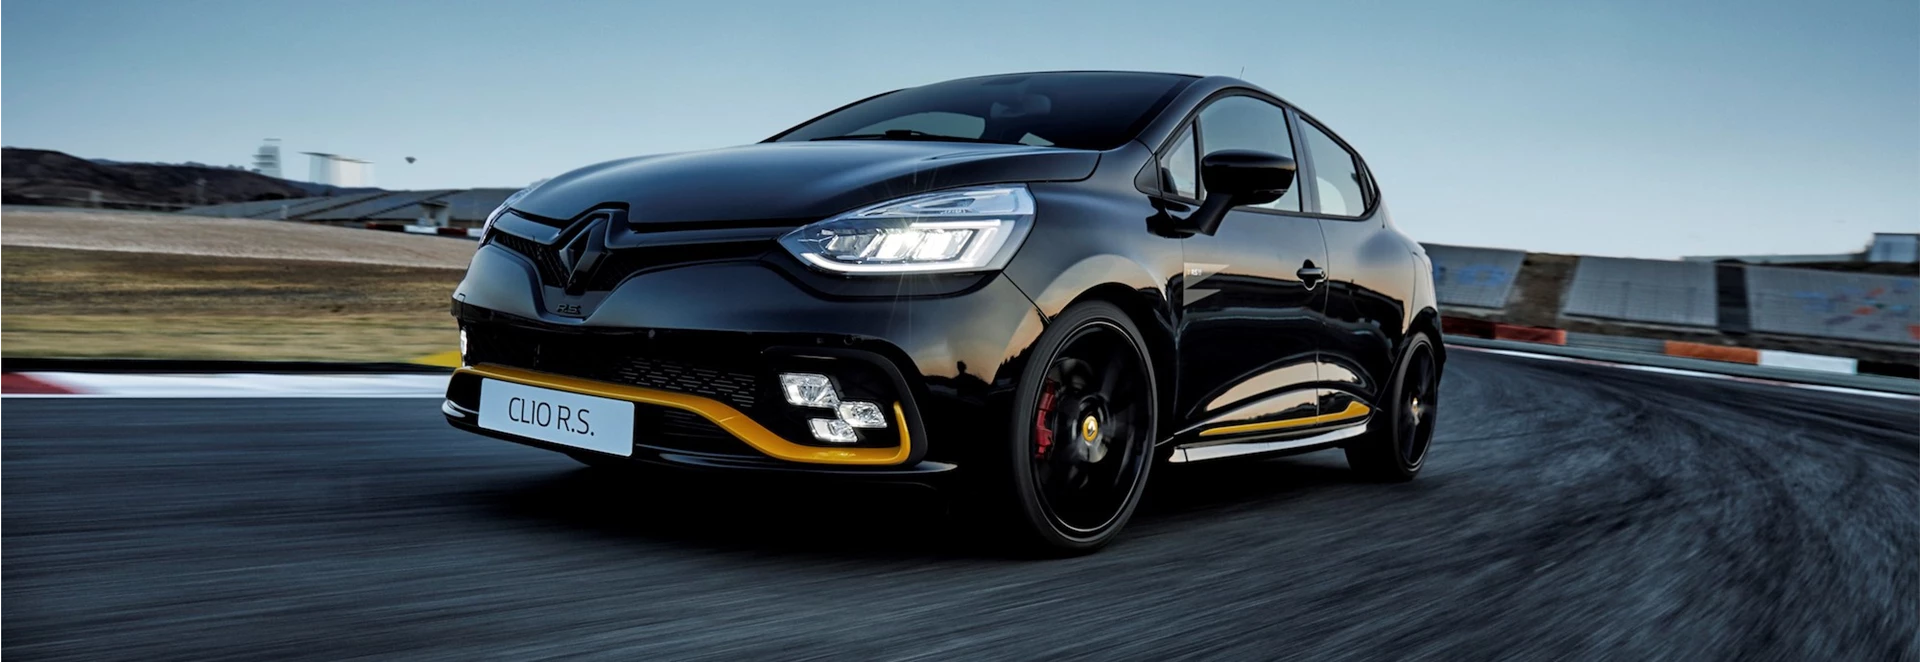 Limited-edition Renault Clio R.S.18 now on sale